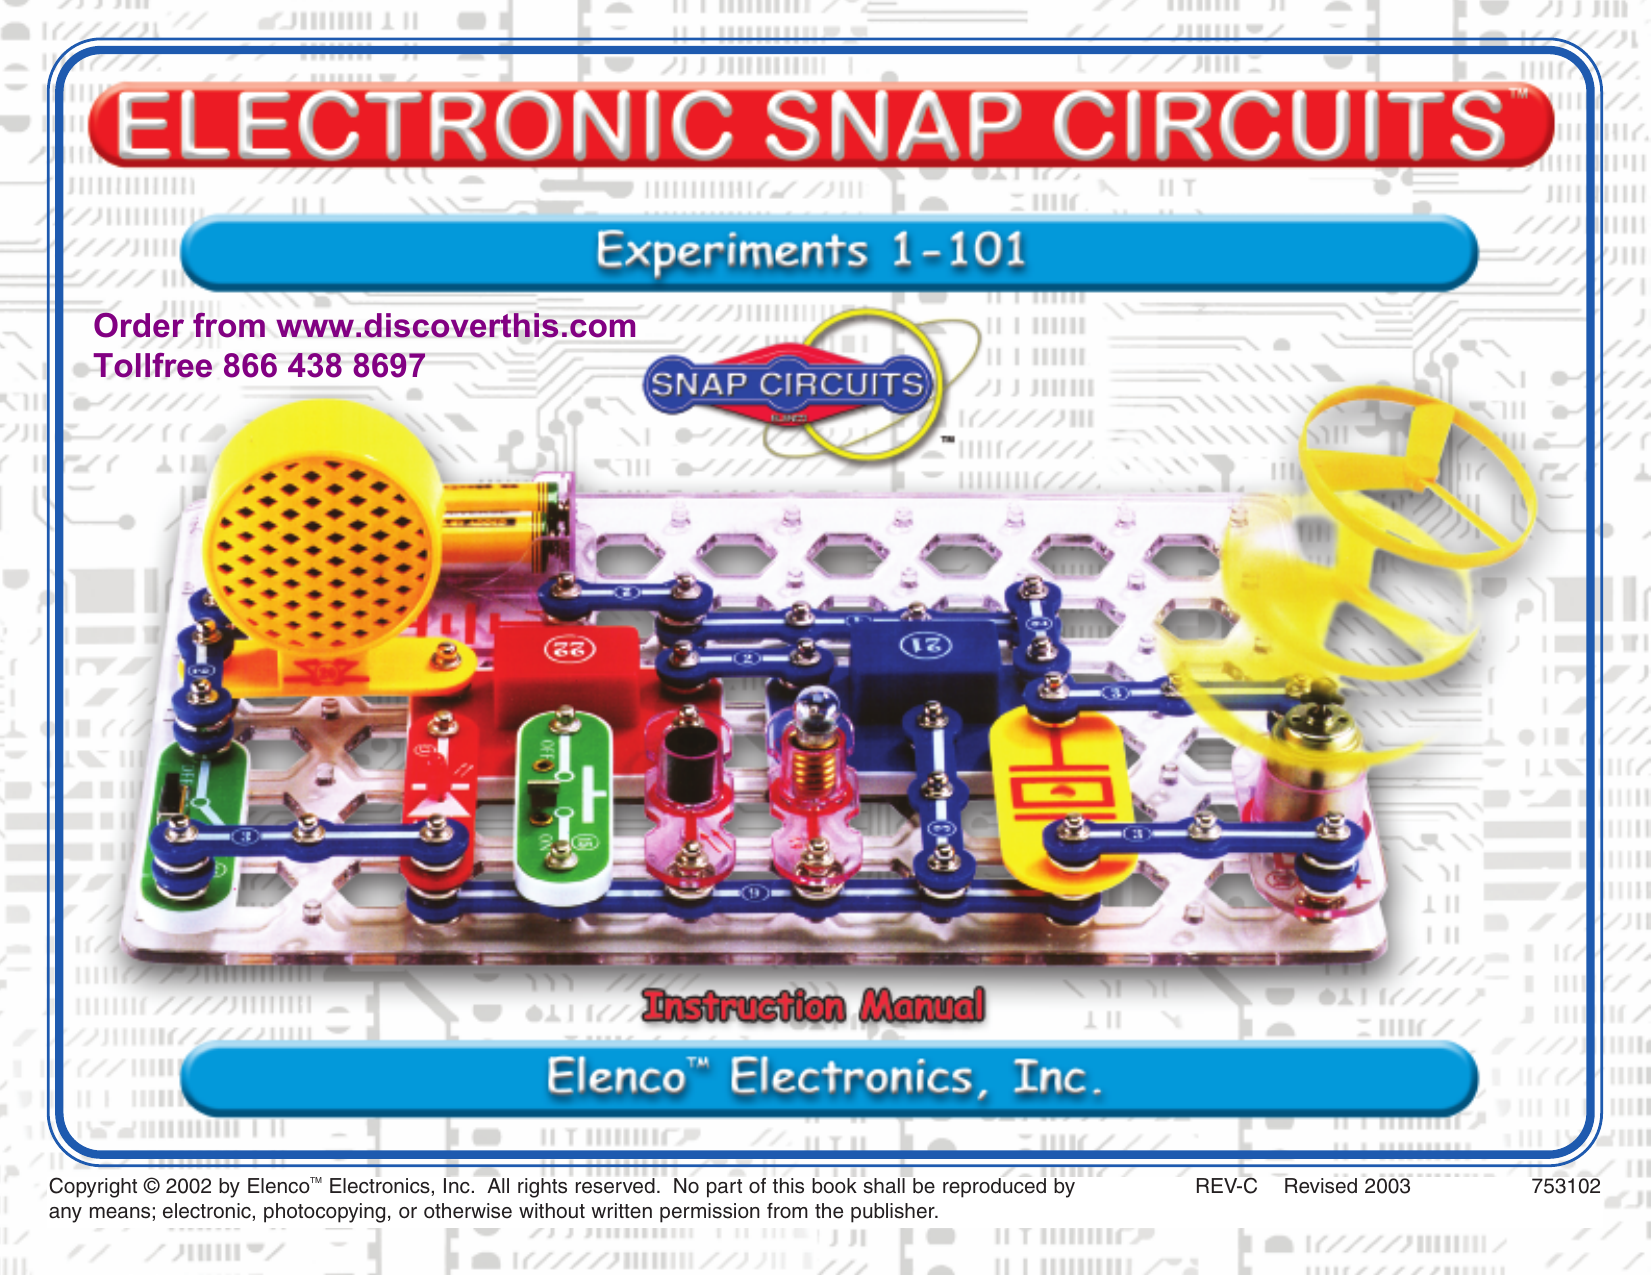 Electronic Snap Circuits Experiments 1-101 Instruction Manual *BOOK ONLY* Elenco 